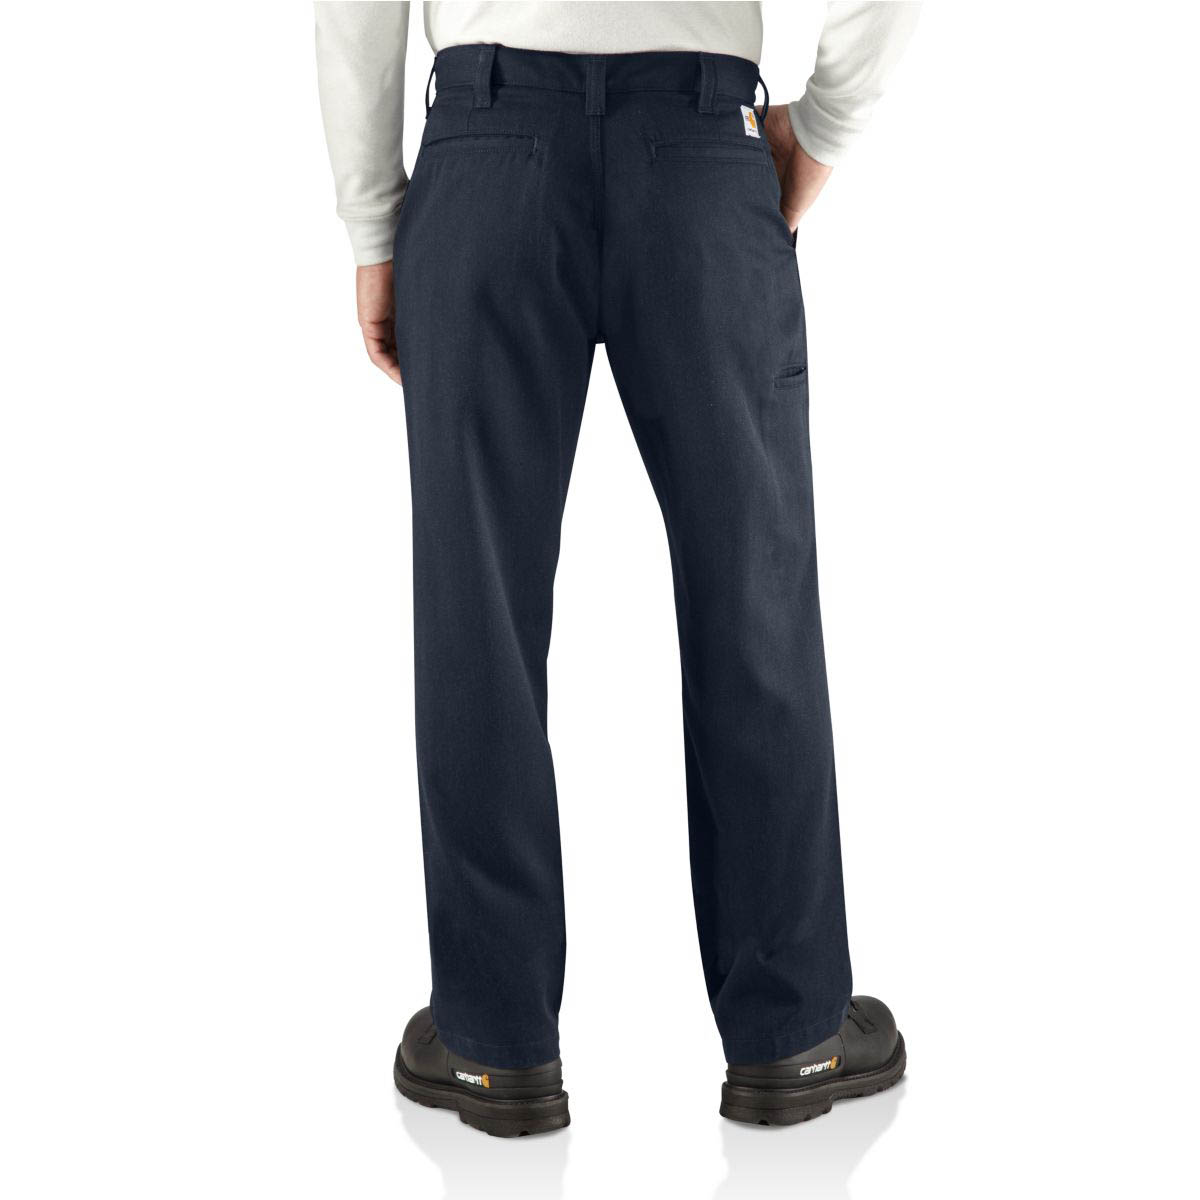 Carhartt Men's Flame Resistant Work Pant Relaxed Fit